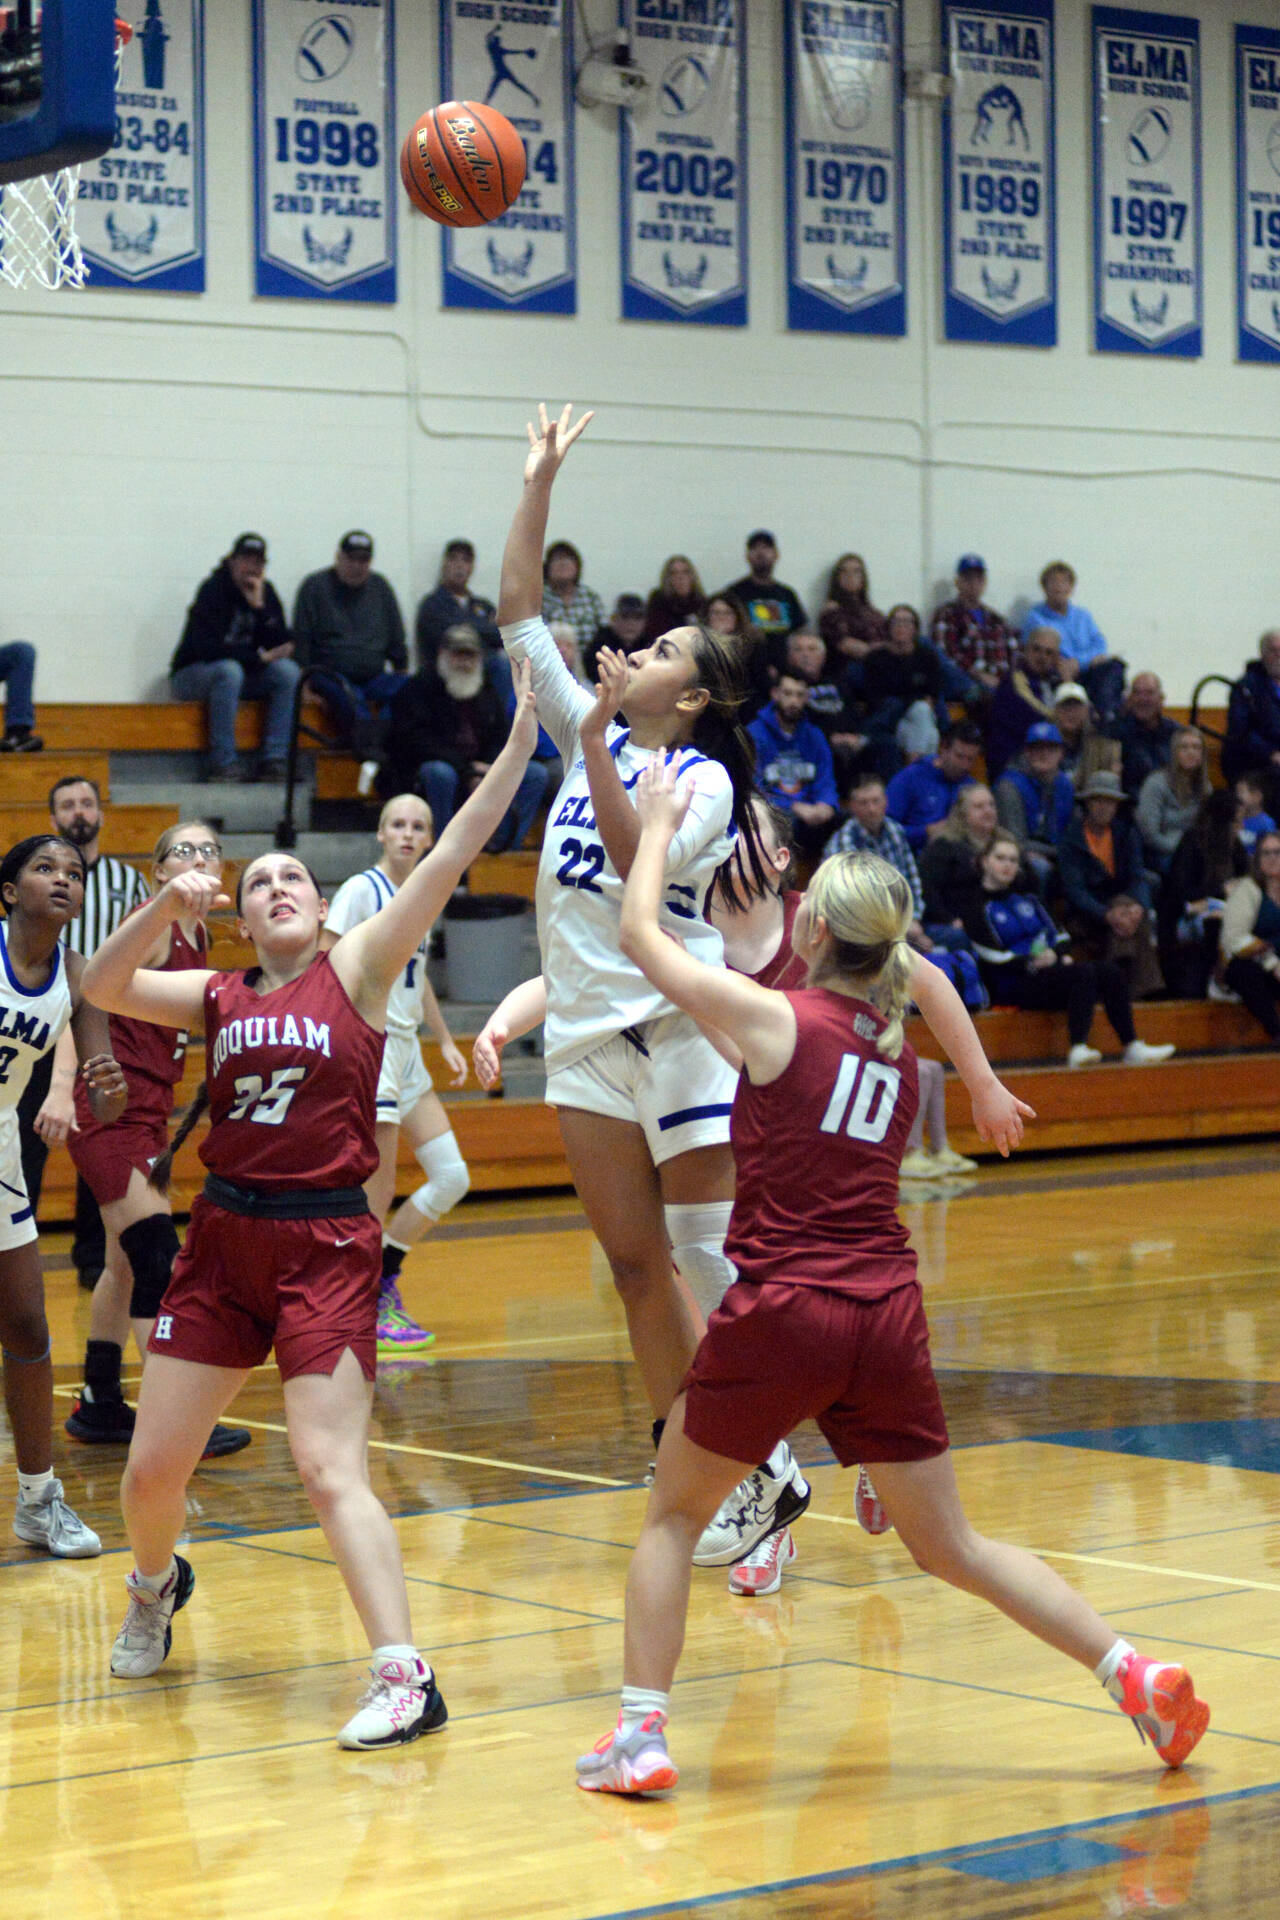 RYAN SPARKS | THE DAILY WORLD Elma’s Eliza Sibbett (22) scores on a floater against Hoquiam’s Dylan Little (35) and Ellie Graham (10) in the second half of the Eagles’ 46-30 win on Wednesday at Elma High School.